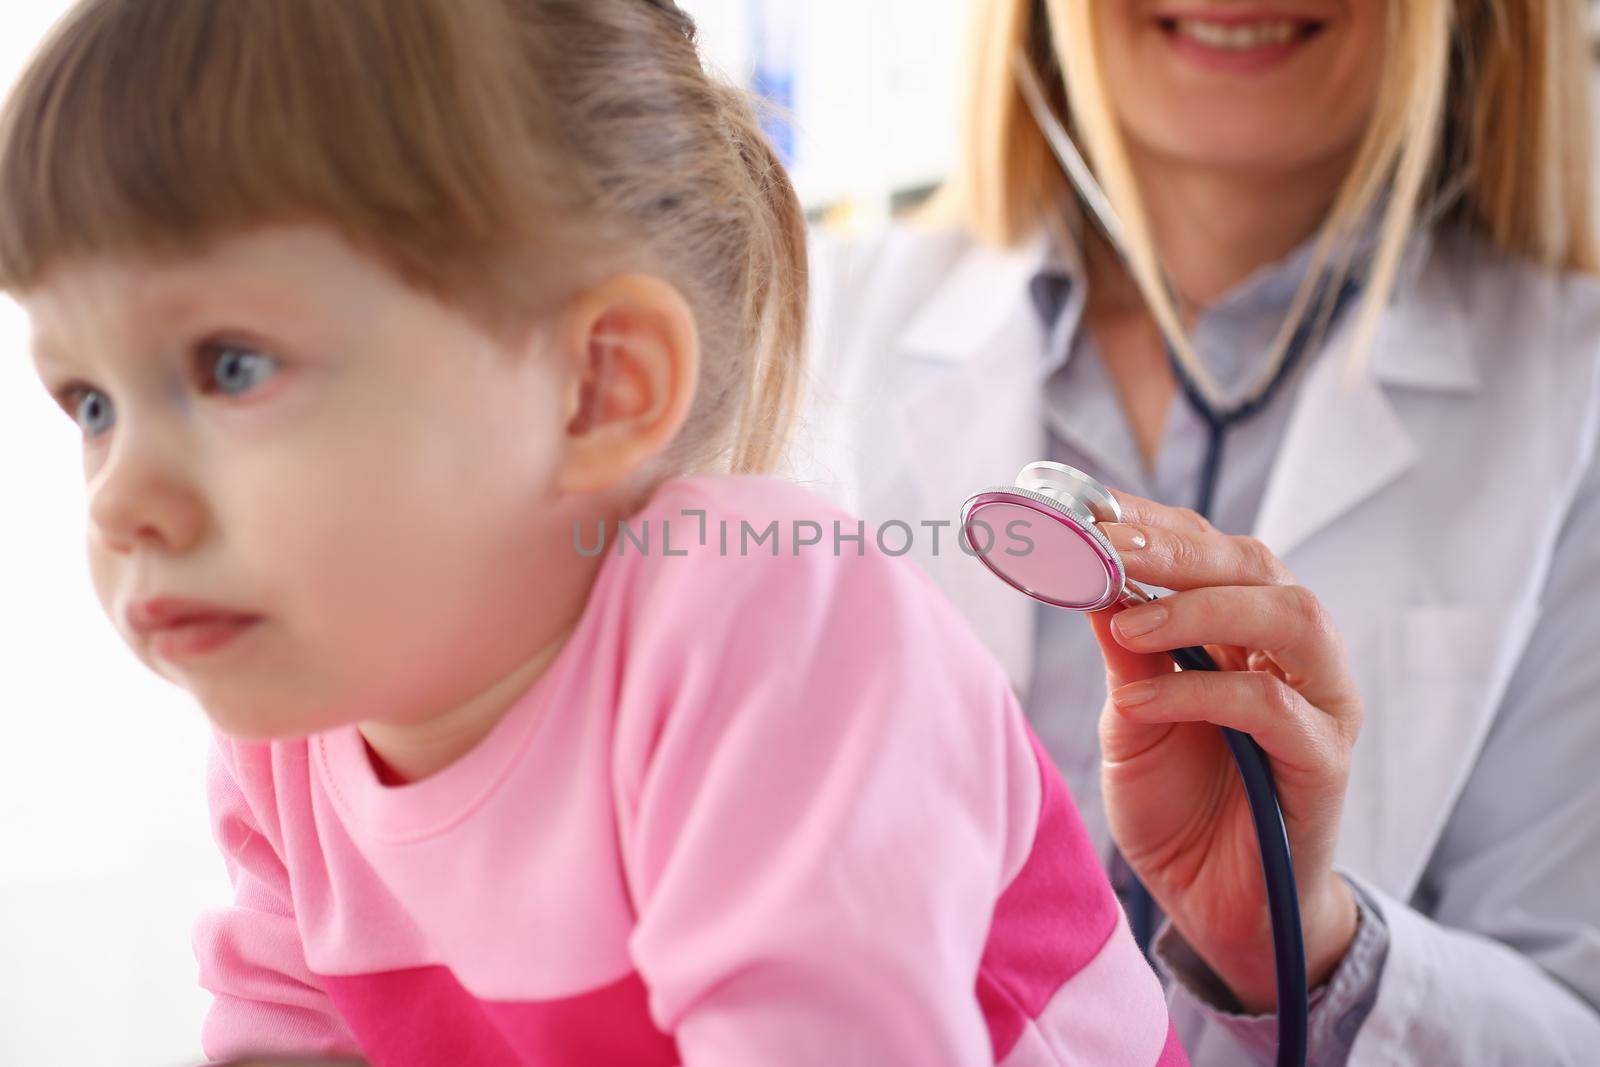 Pediatrician listens to lungs of small child girl with stethoscope. Children health insurance and examination of lungs and heart